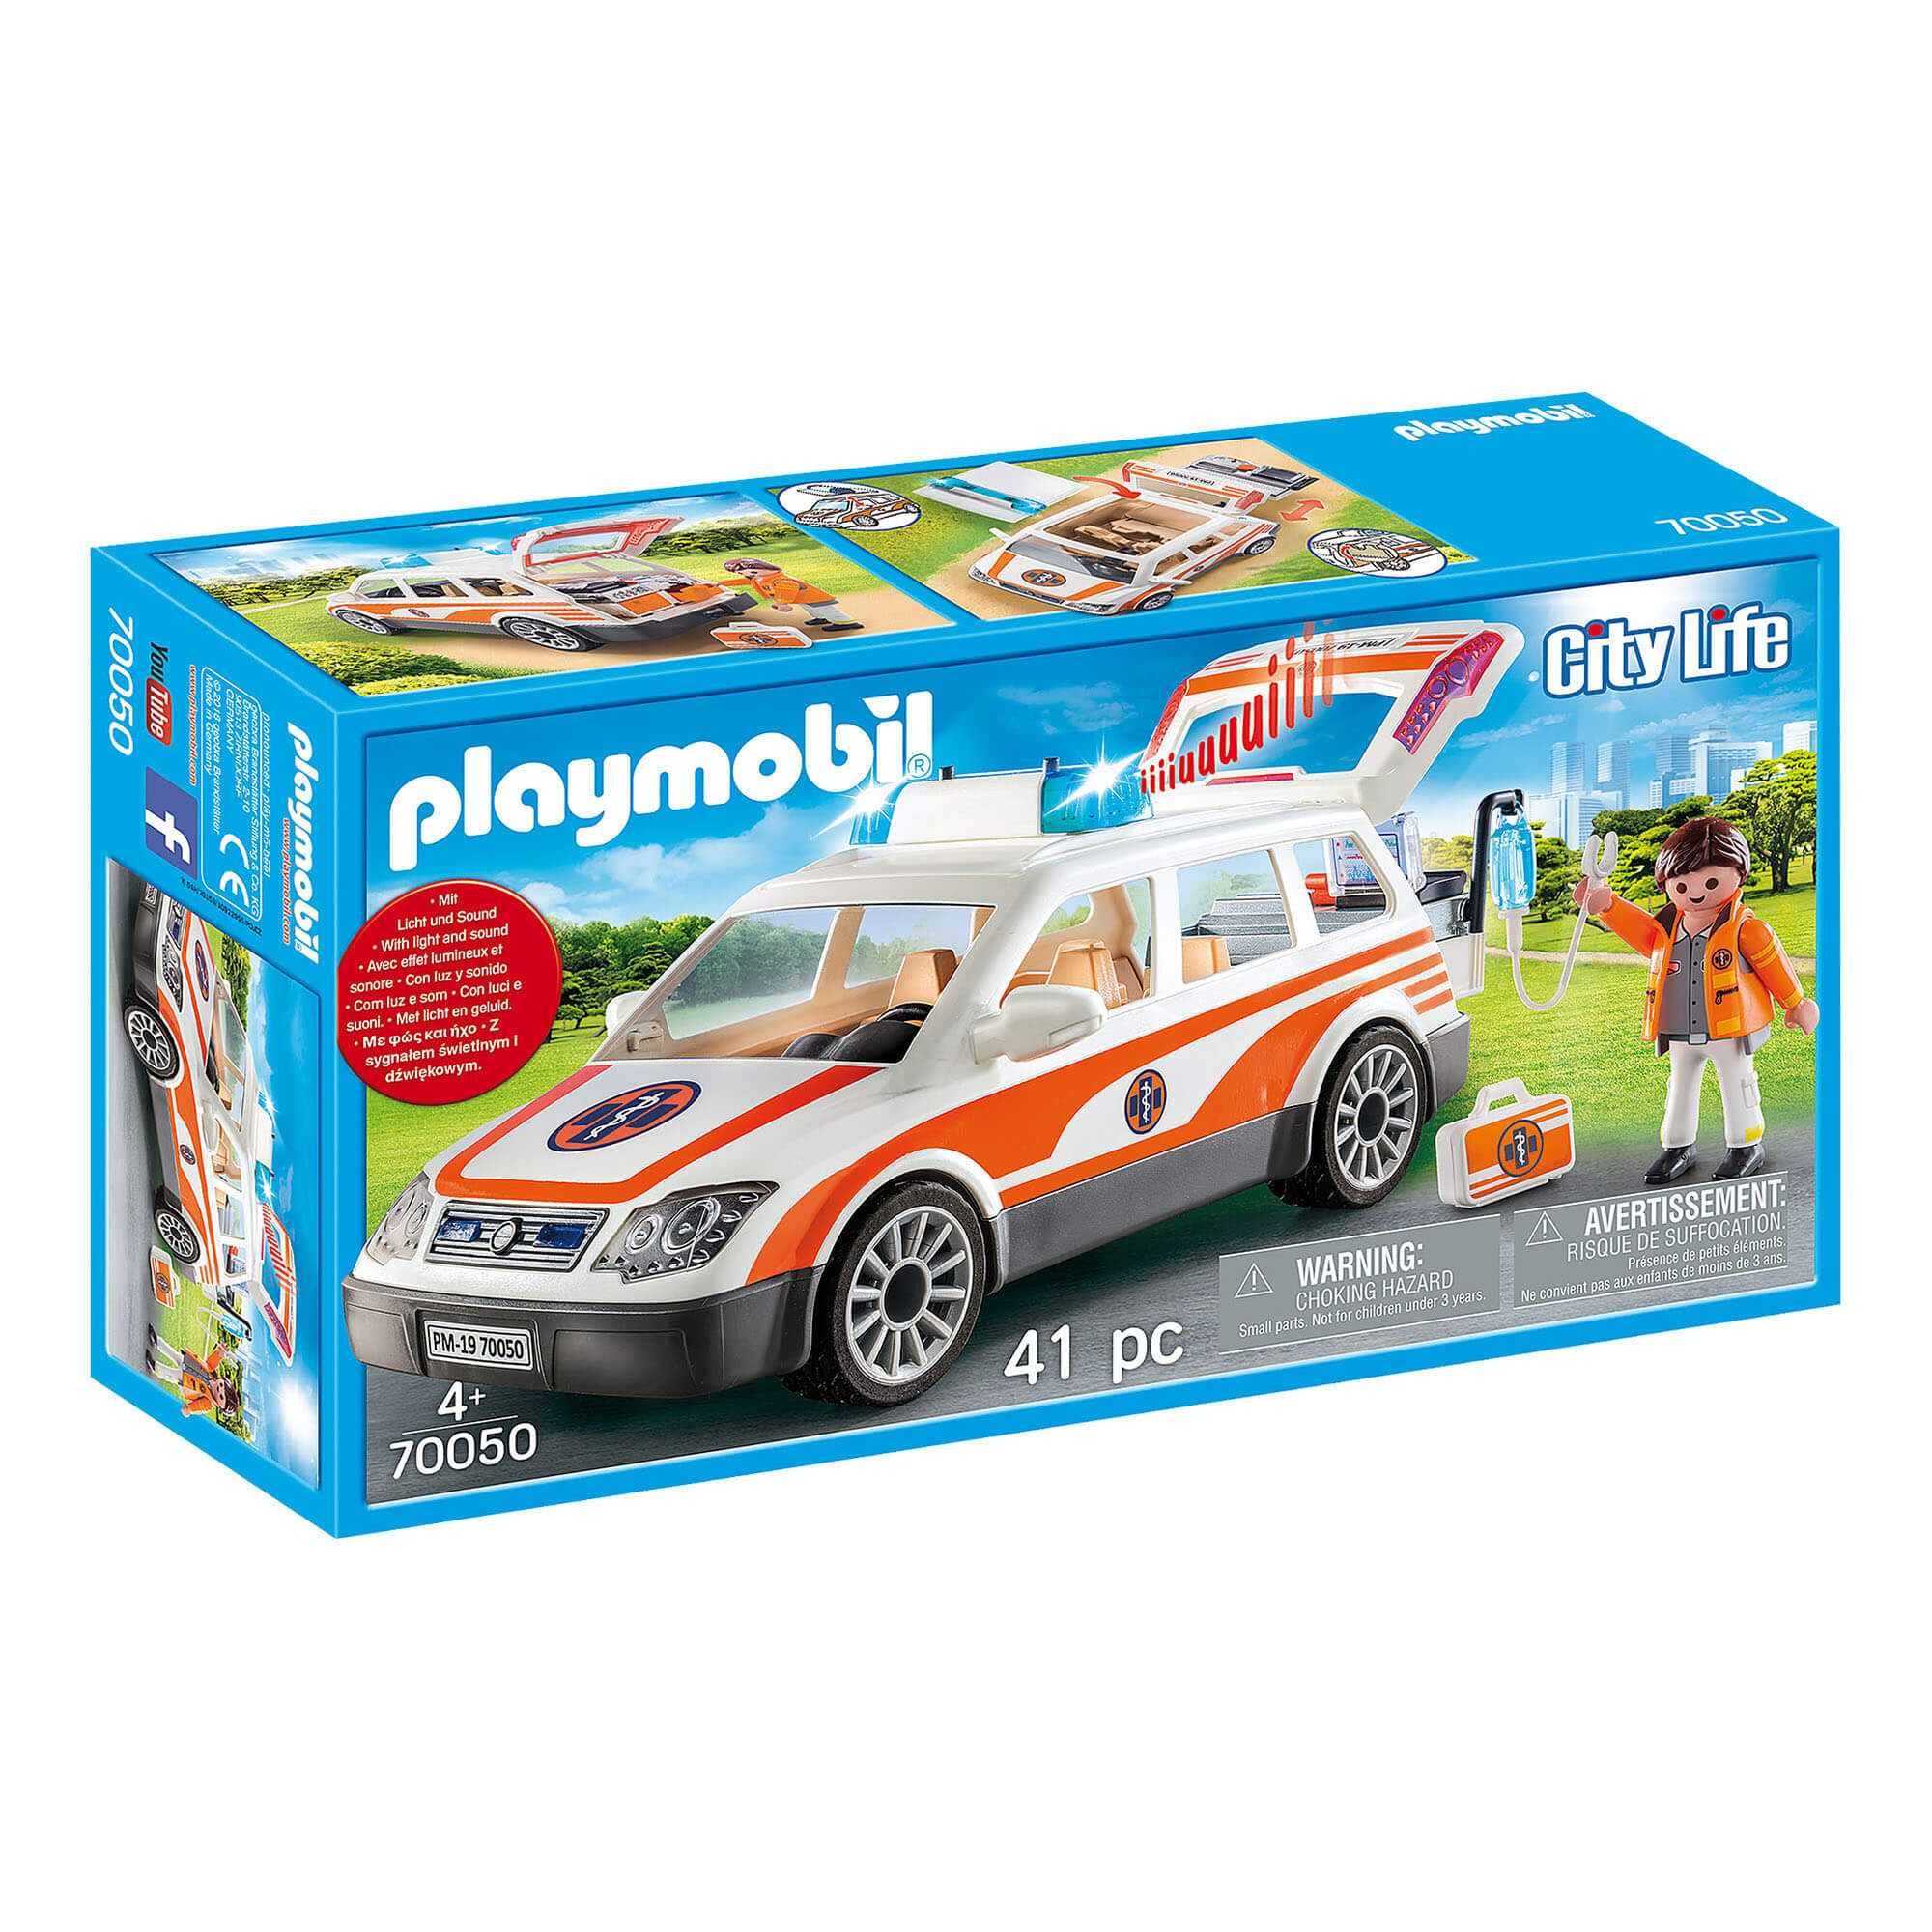 PLAYMOBIL Rescue 911 Emergency Car with Siren (70050)